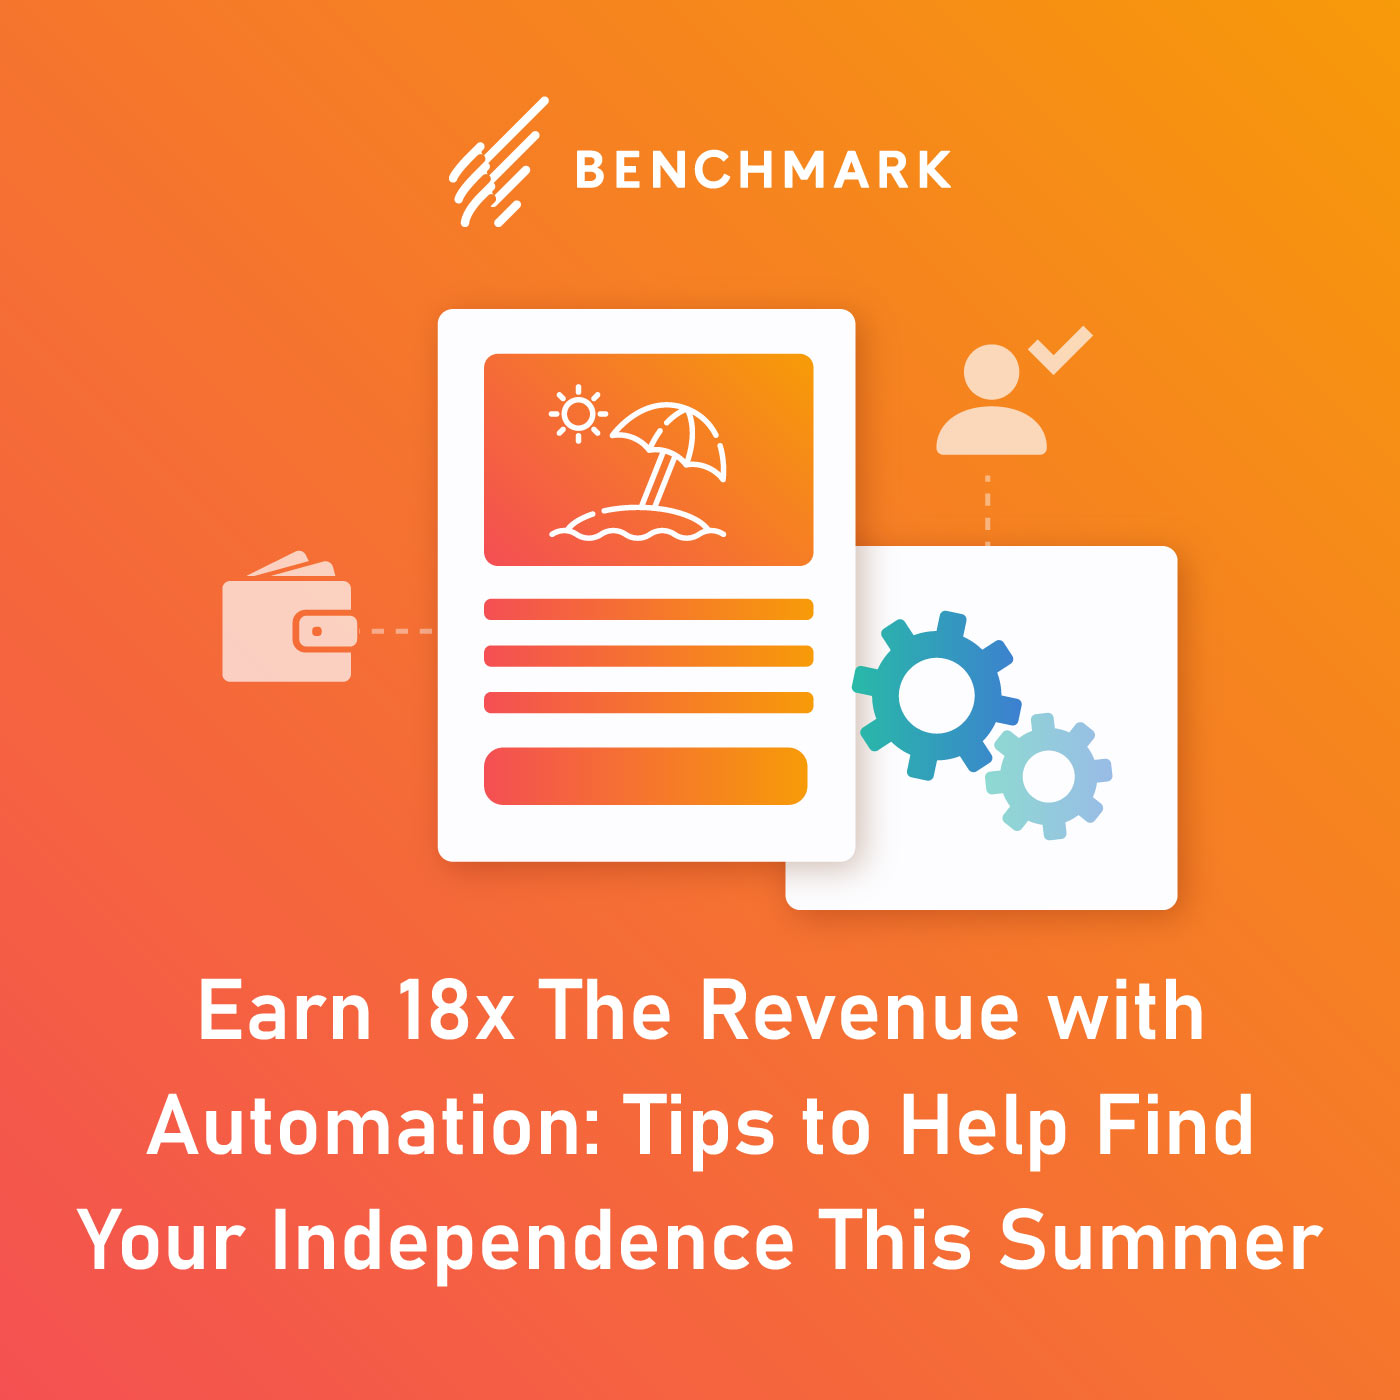 Earn 18x The Revenue with Automation: Tips to Help Find Your Independence This Summer